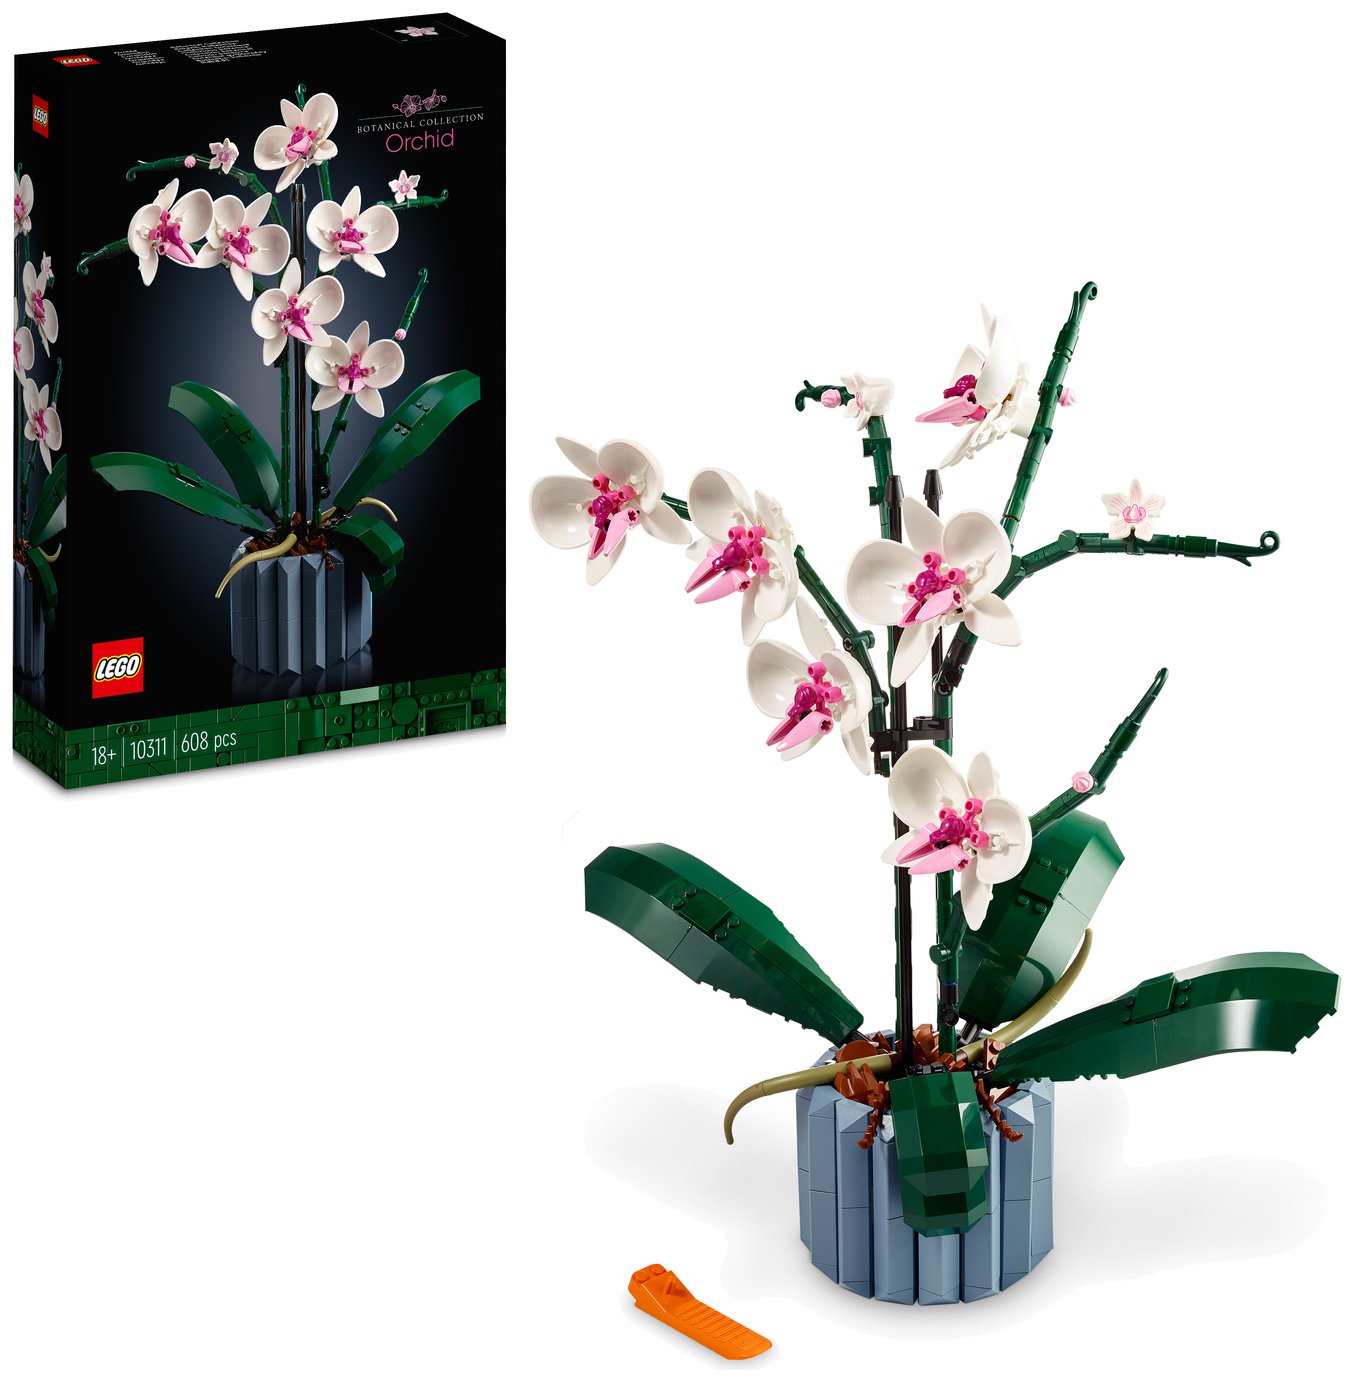 LEGO Icons Orchid Plant & Flowers Set for Adults 10311 Review - Toy Reviews